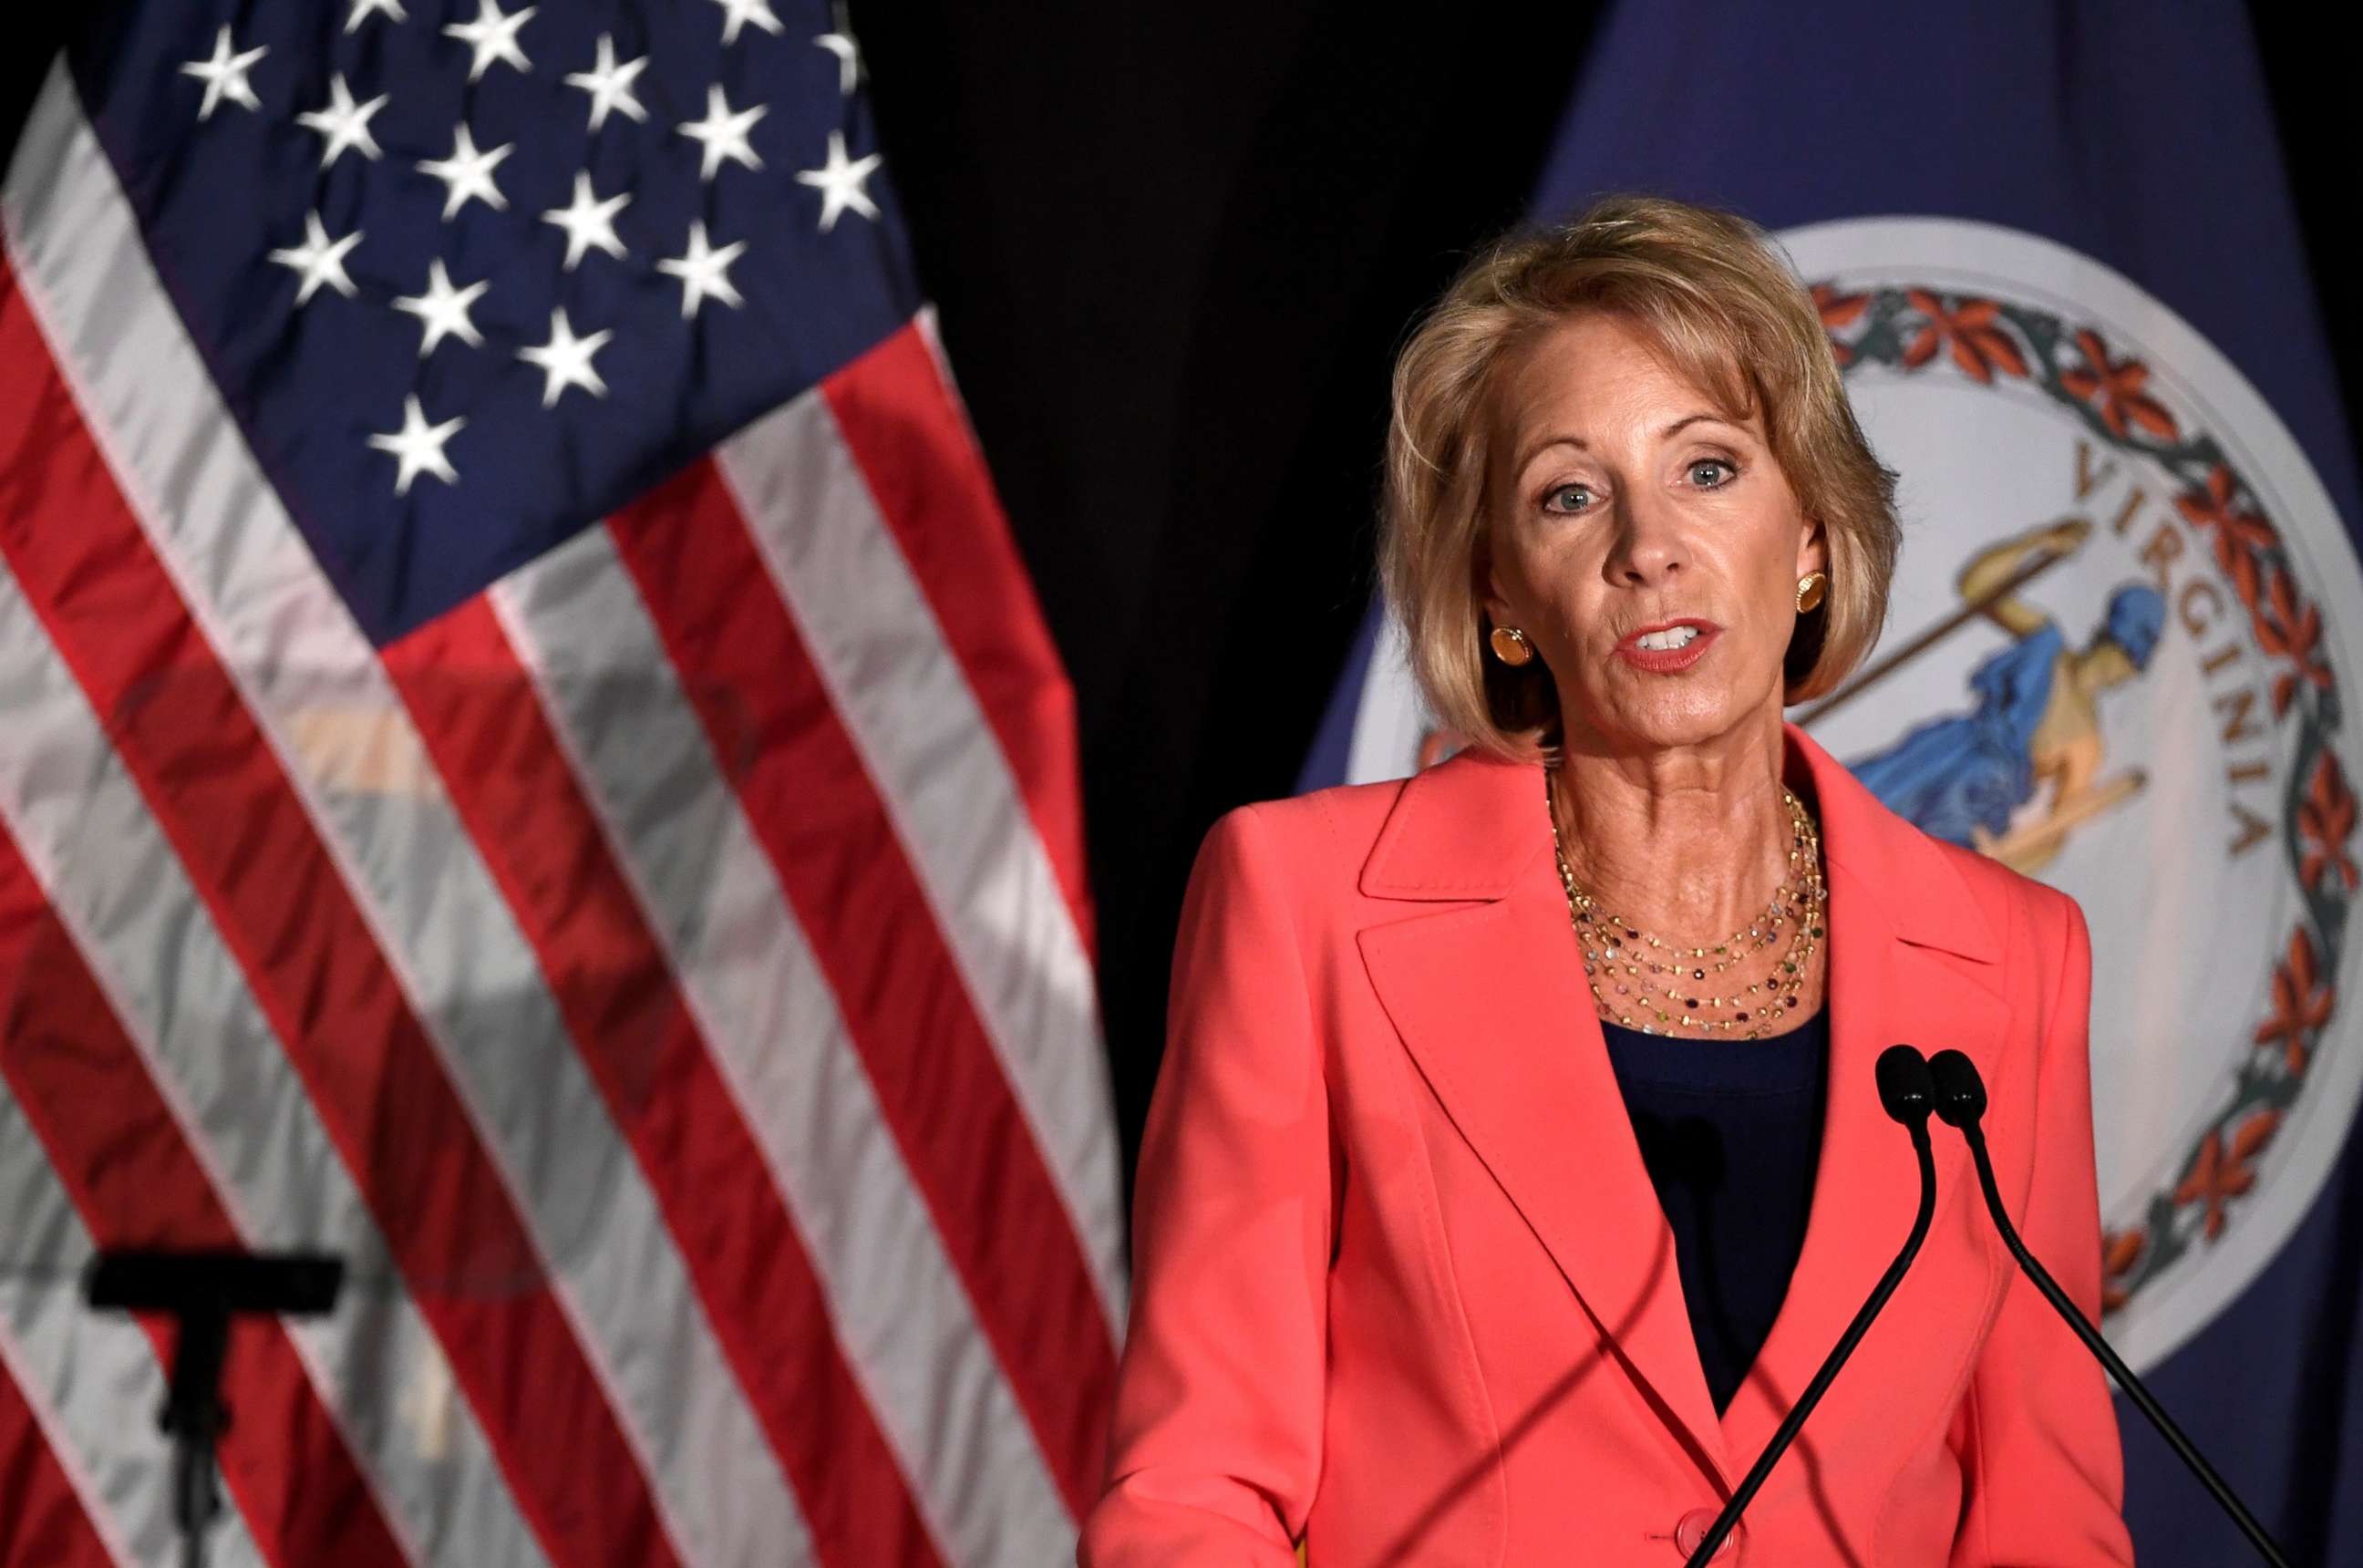 PHOTO: Education Secretary Betsy DeVos makes remarks during a major policy address on Title IX enforcement, which in college covers sexual harassment, rape and assault, at George Mason University, in Arlington, Va., Sept. 7, 2017. 